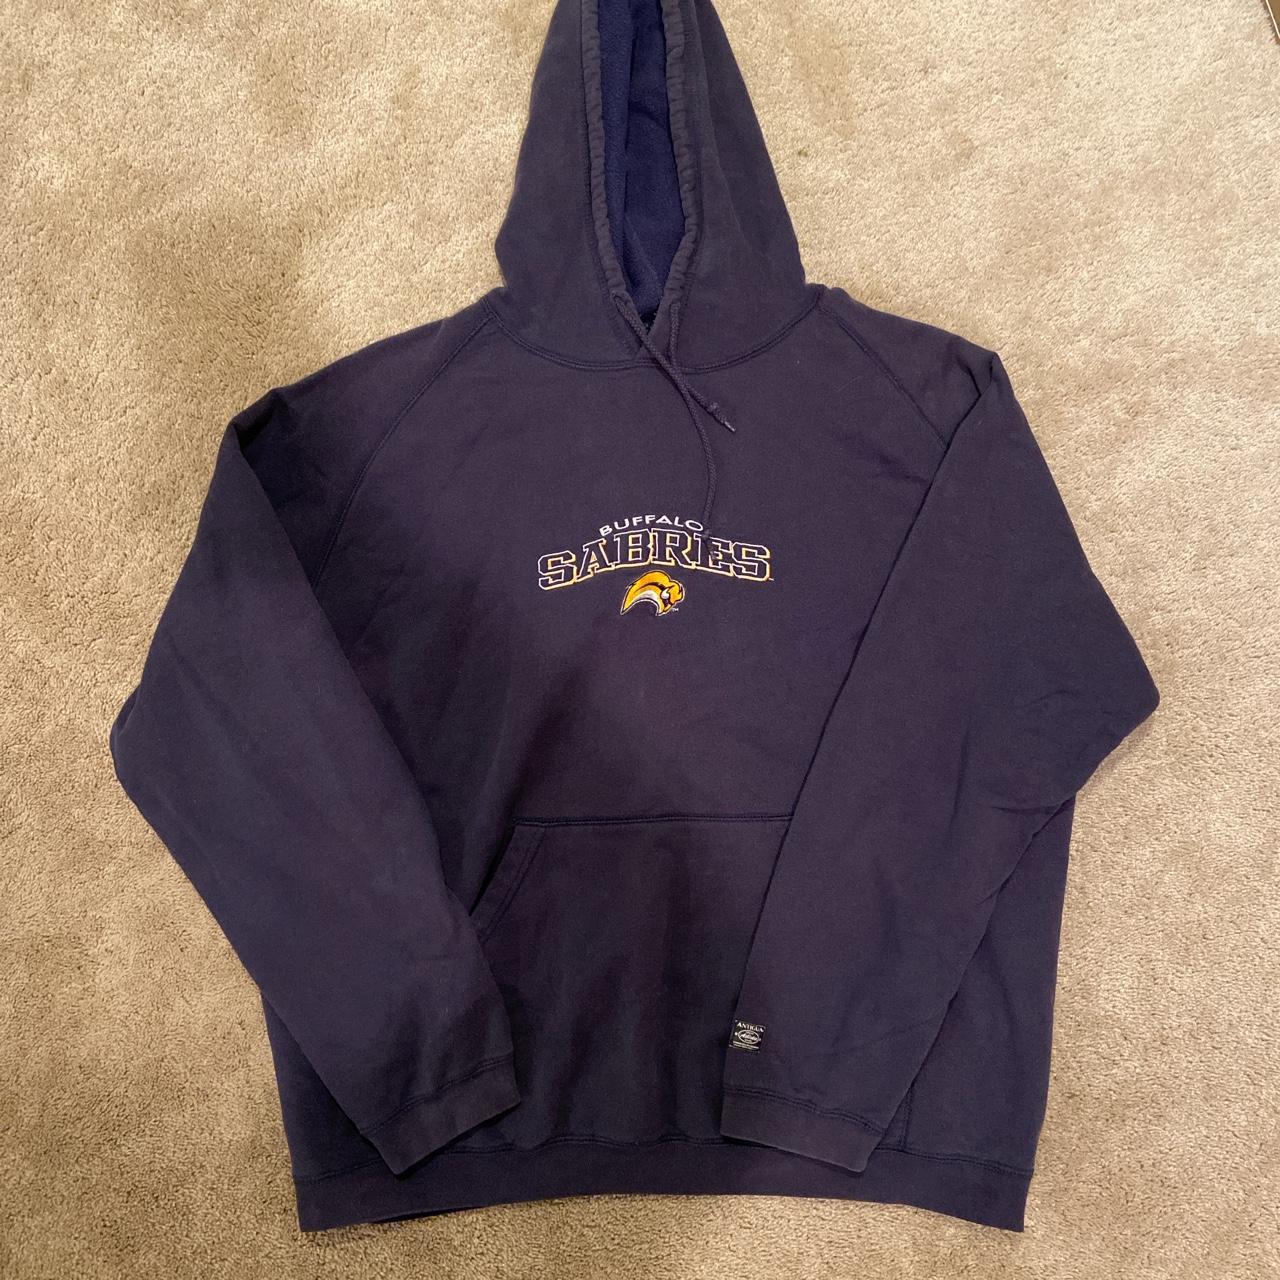 Product Image 1 - Vintage 90s Buffalo Sabres Hoodie.